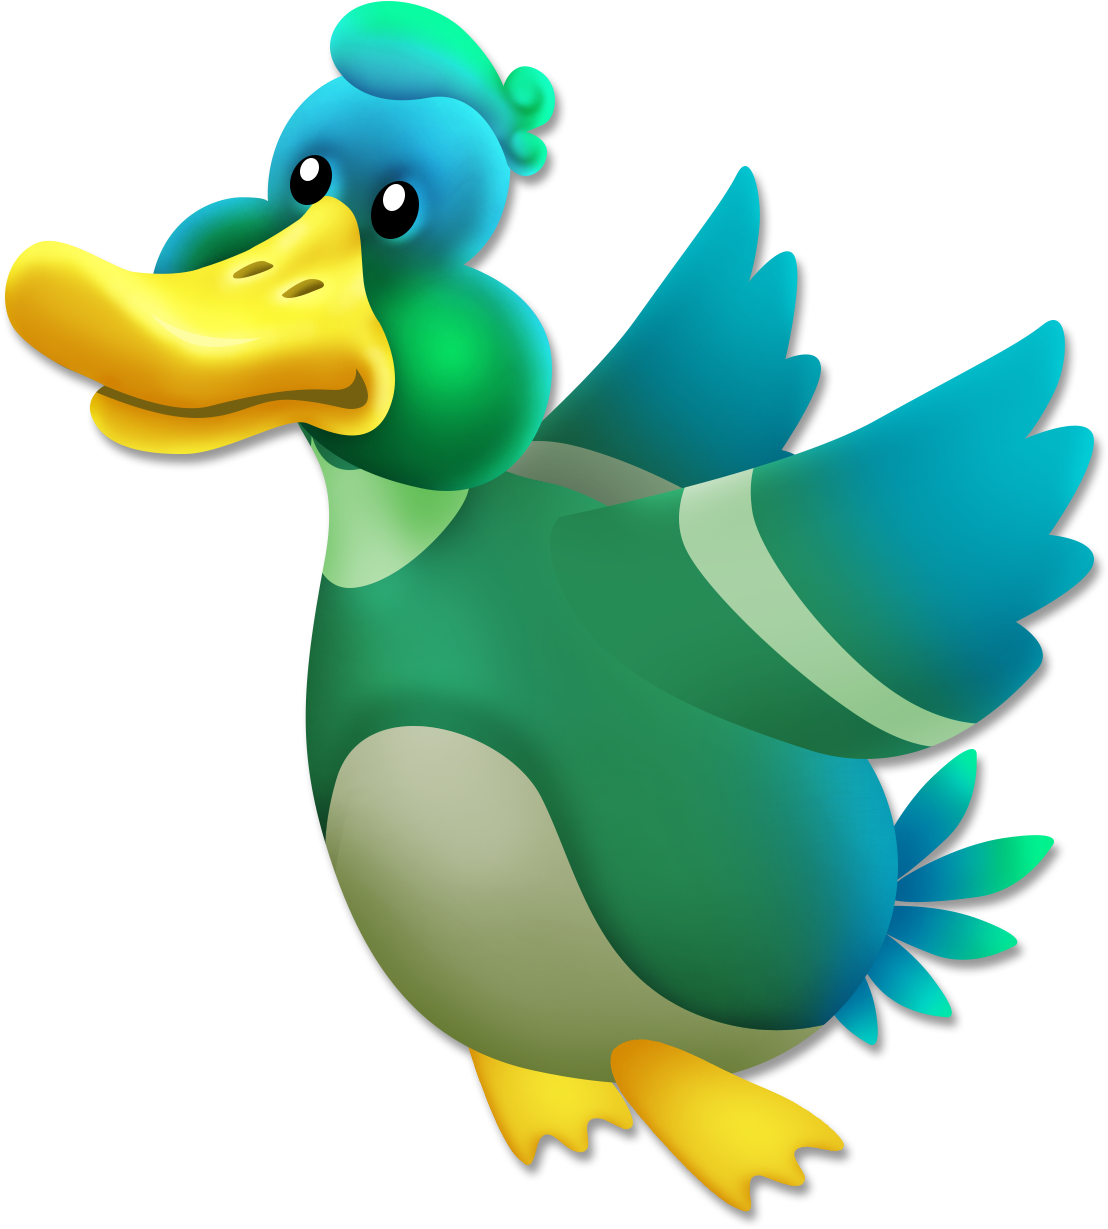 Duck Flying - Hay Day Duck - (1330x1330) Png Clipart Downloa